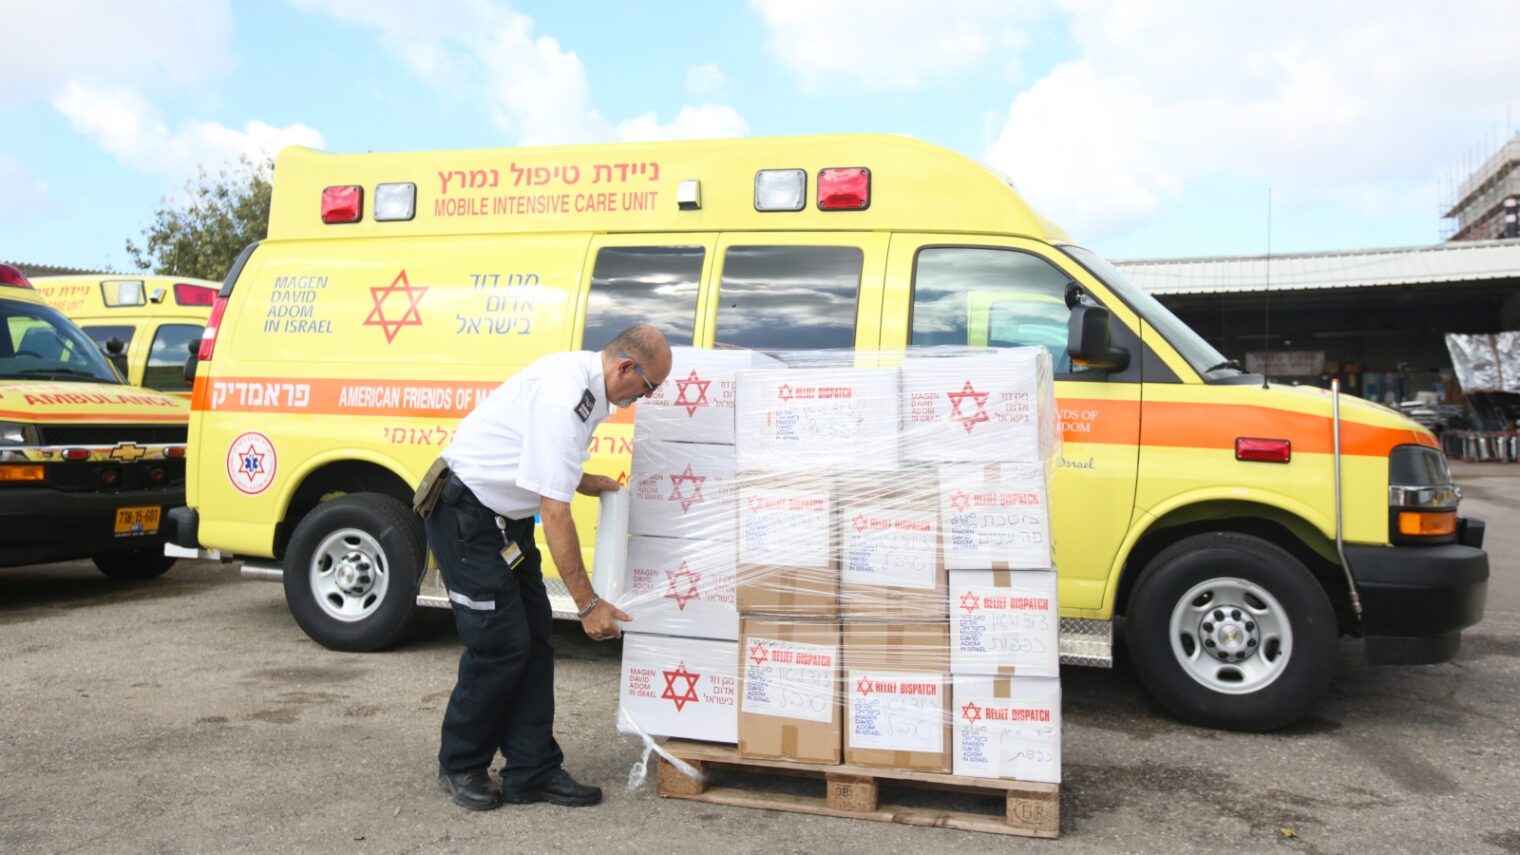 A Magen David Adom worker packing protective supplies to send to China, February 2, 2020. Photo courtesy of MDA